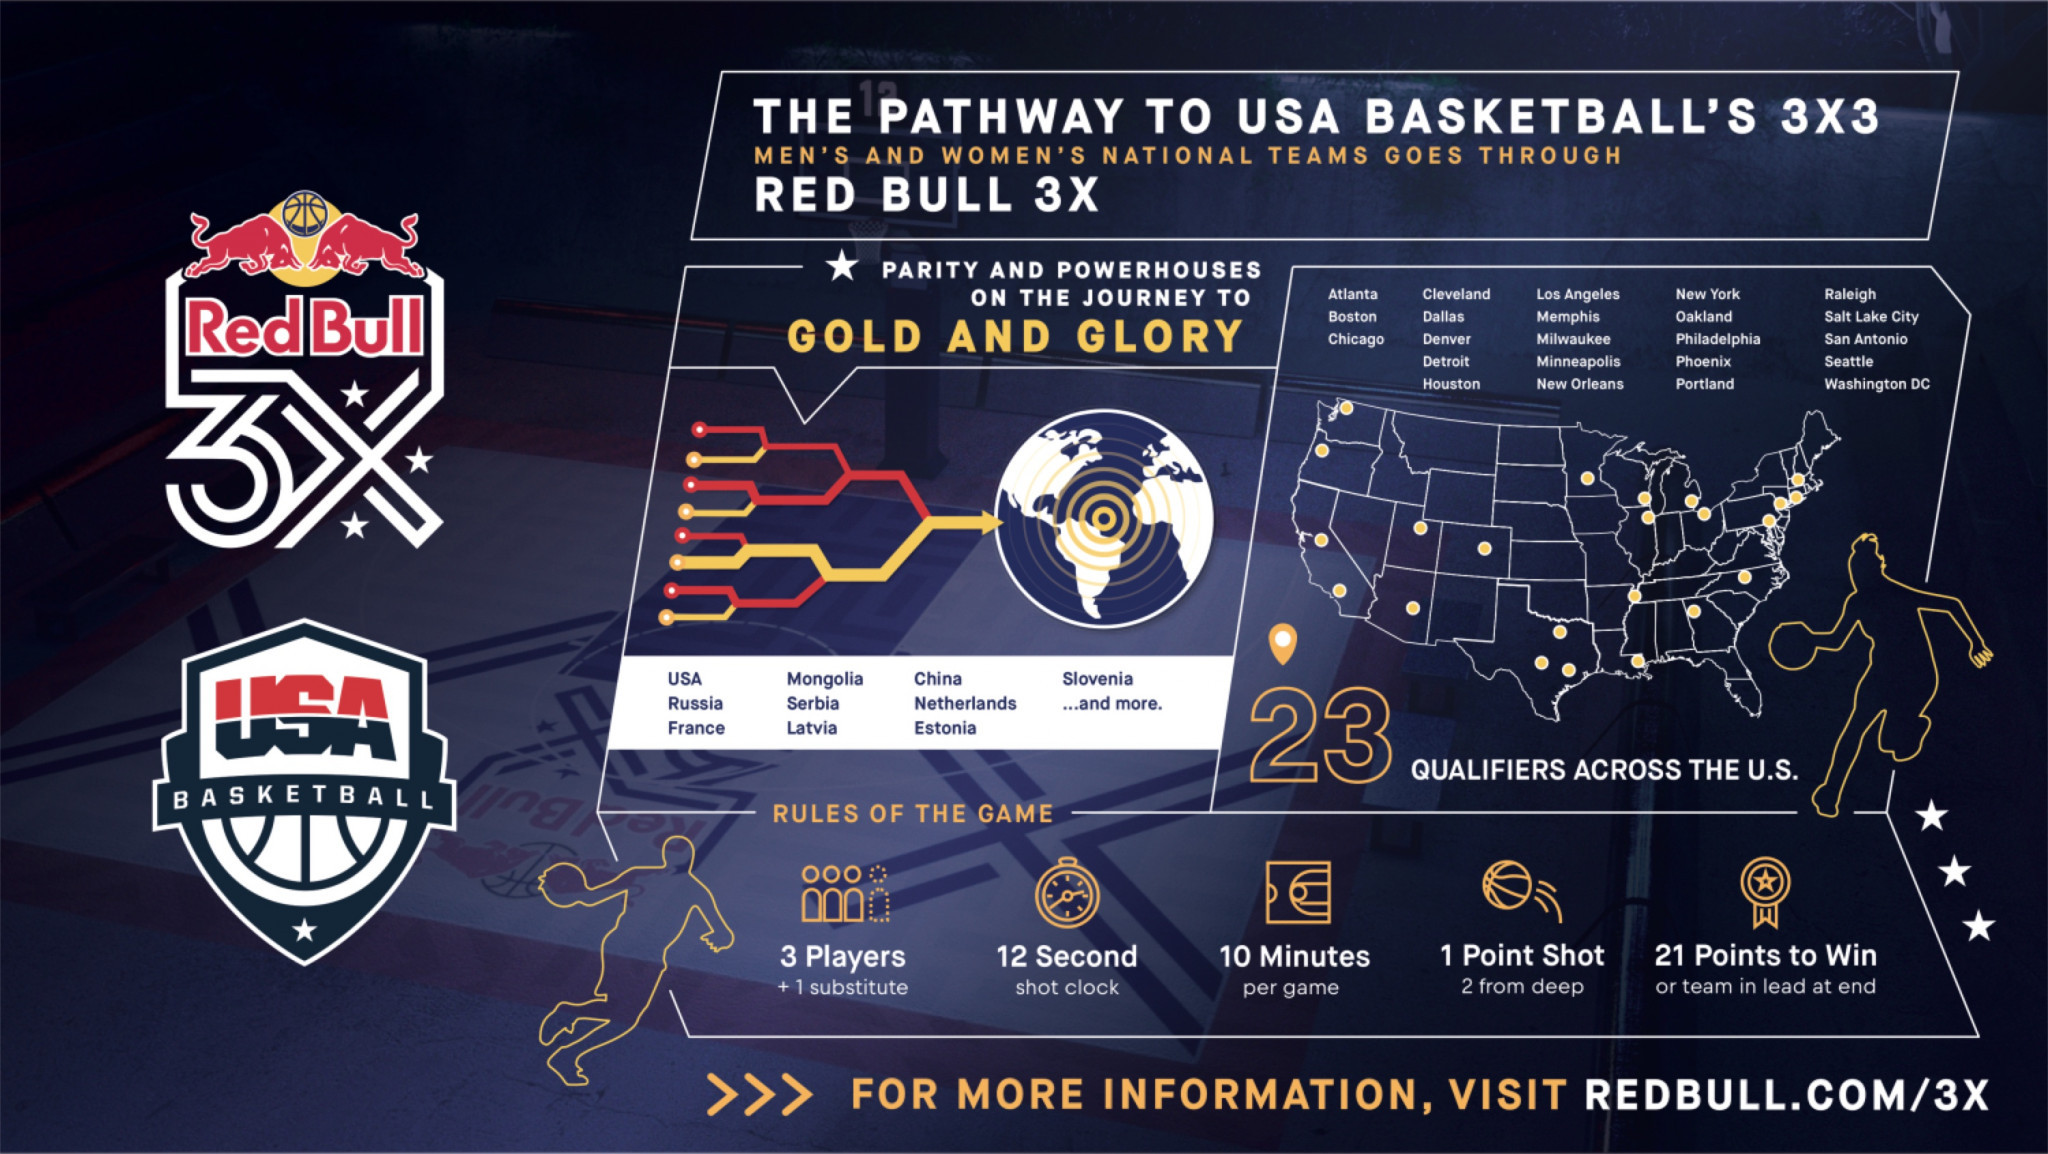 USA Basketball has revealed details of how players qualify to represent the country in 3x3 at Tokyo 2020 ©USA Basketball